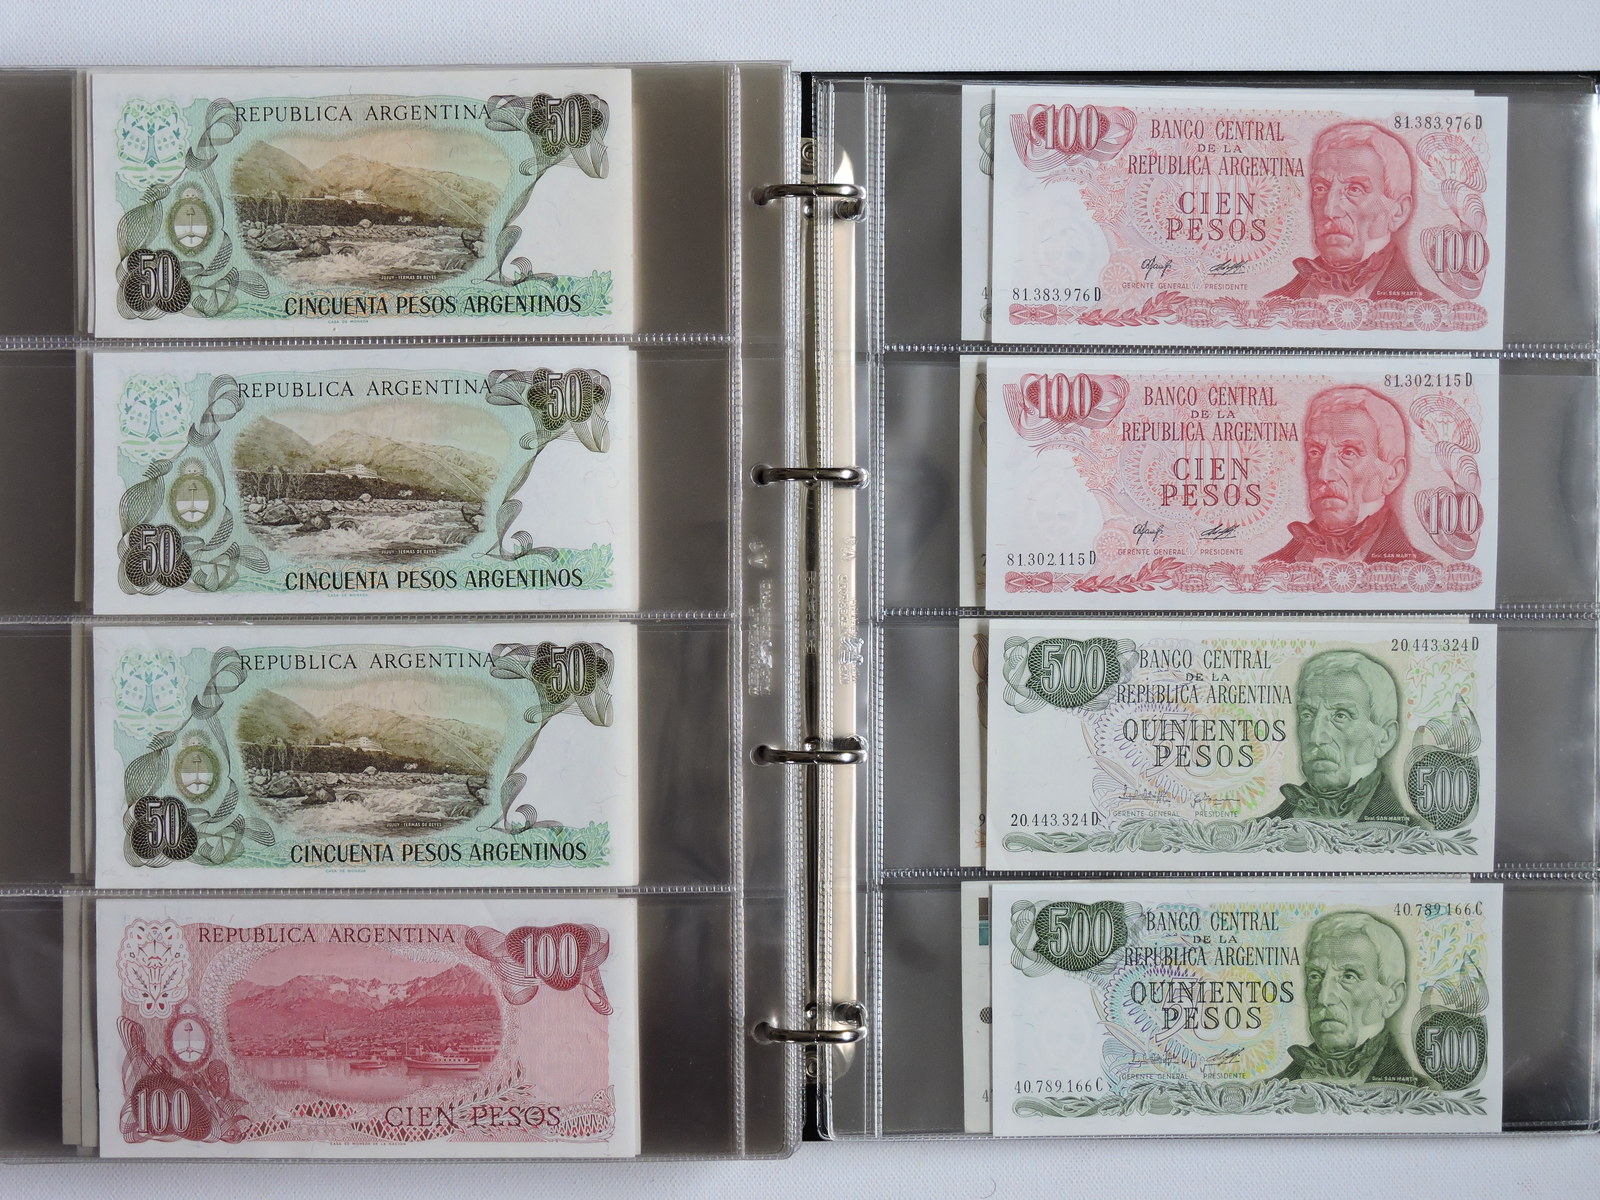 Banknotes, Brazil and Argentina
, page:38, item:1